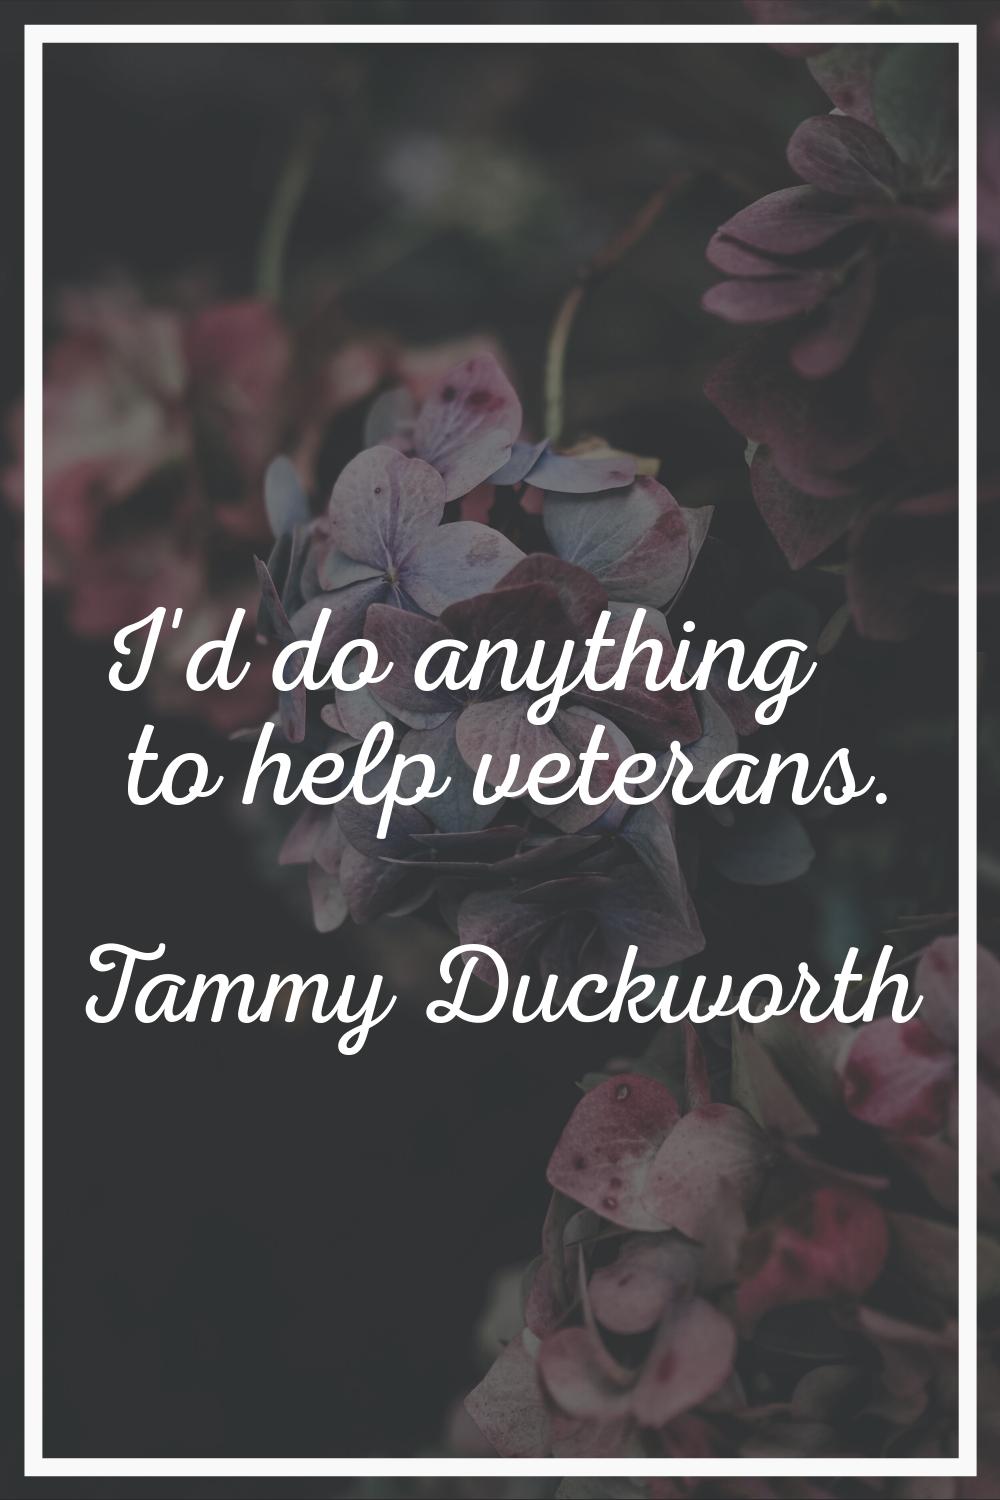 I'd do anything to help veterans.